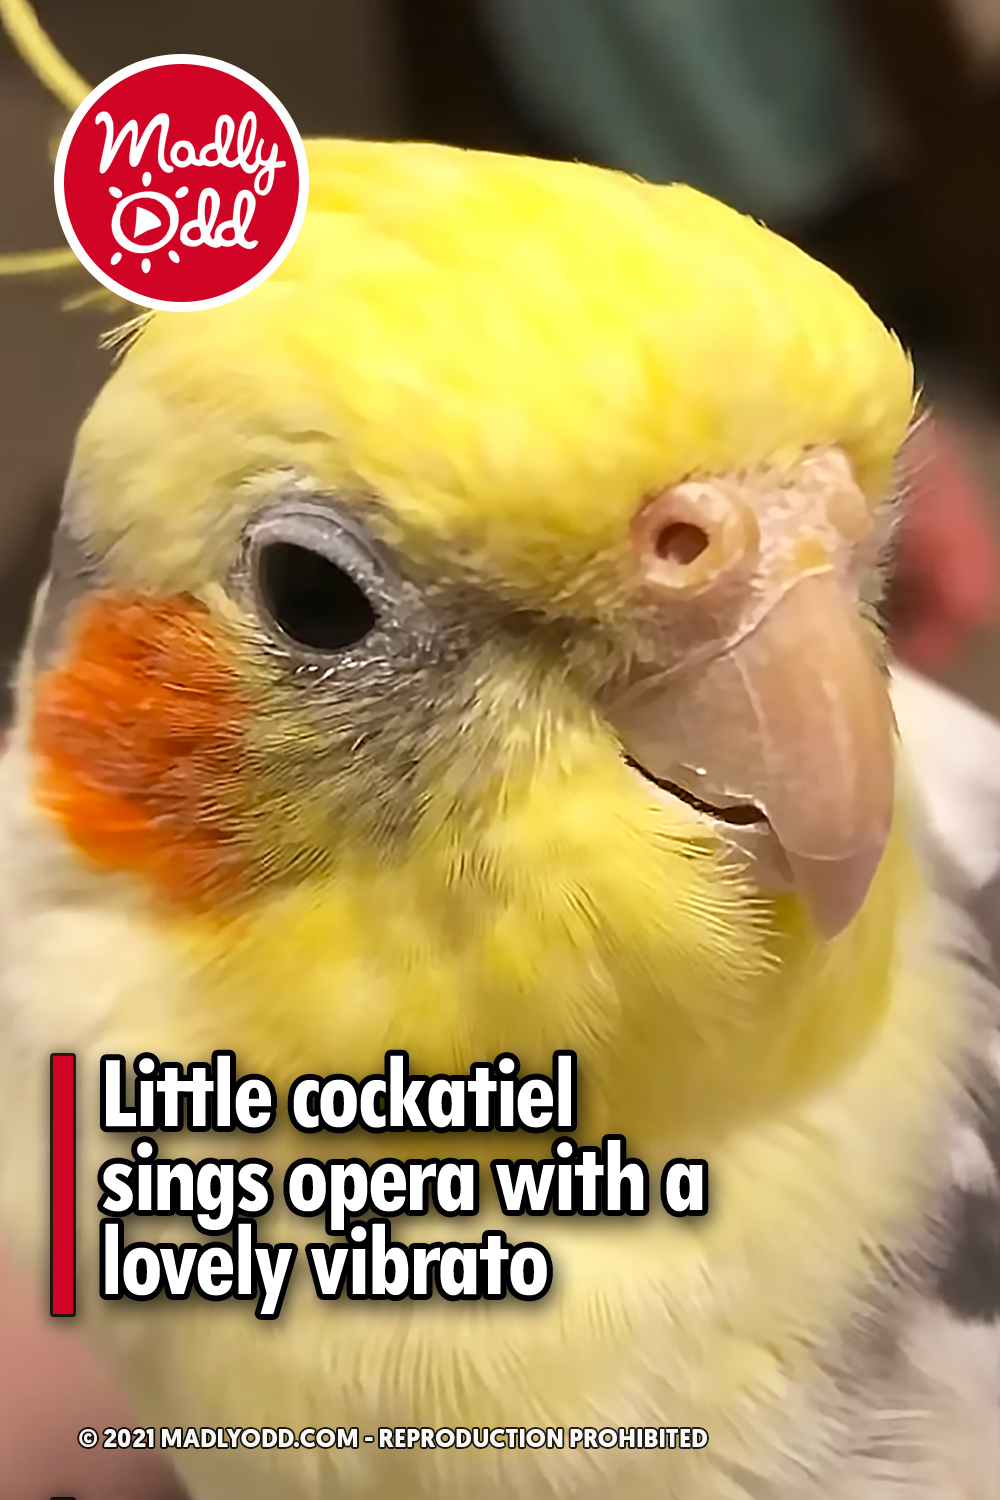 Little cockatiel sings opera with a lovely vibrato